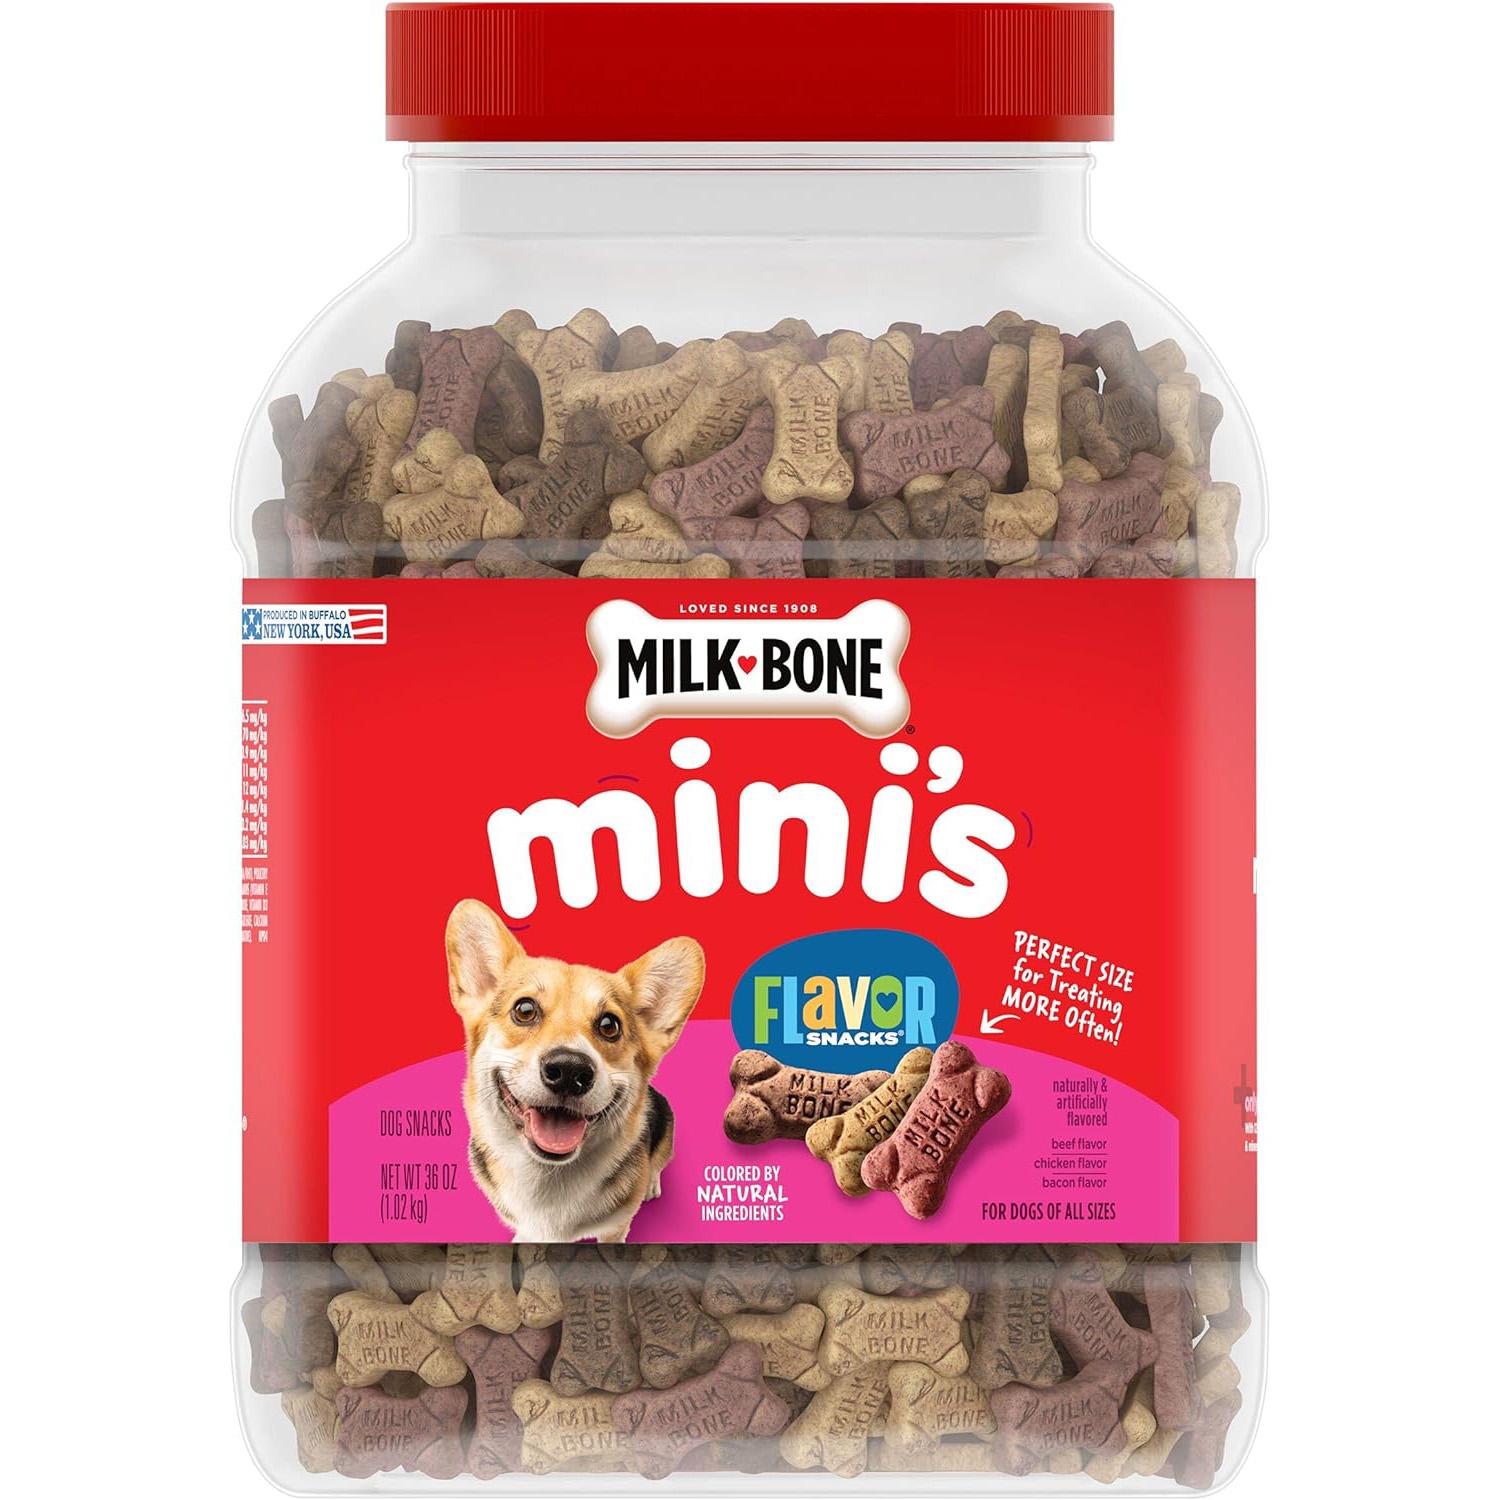 Milk-Bone Minis Flavor Snacks Crunchy Dog Biscuit Treats for $6.32 Shipped